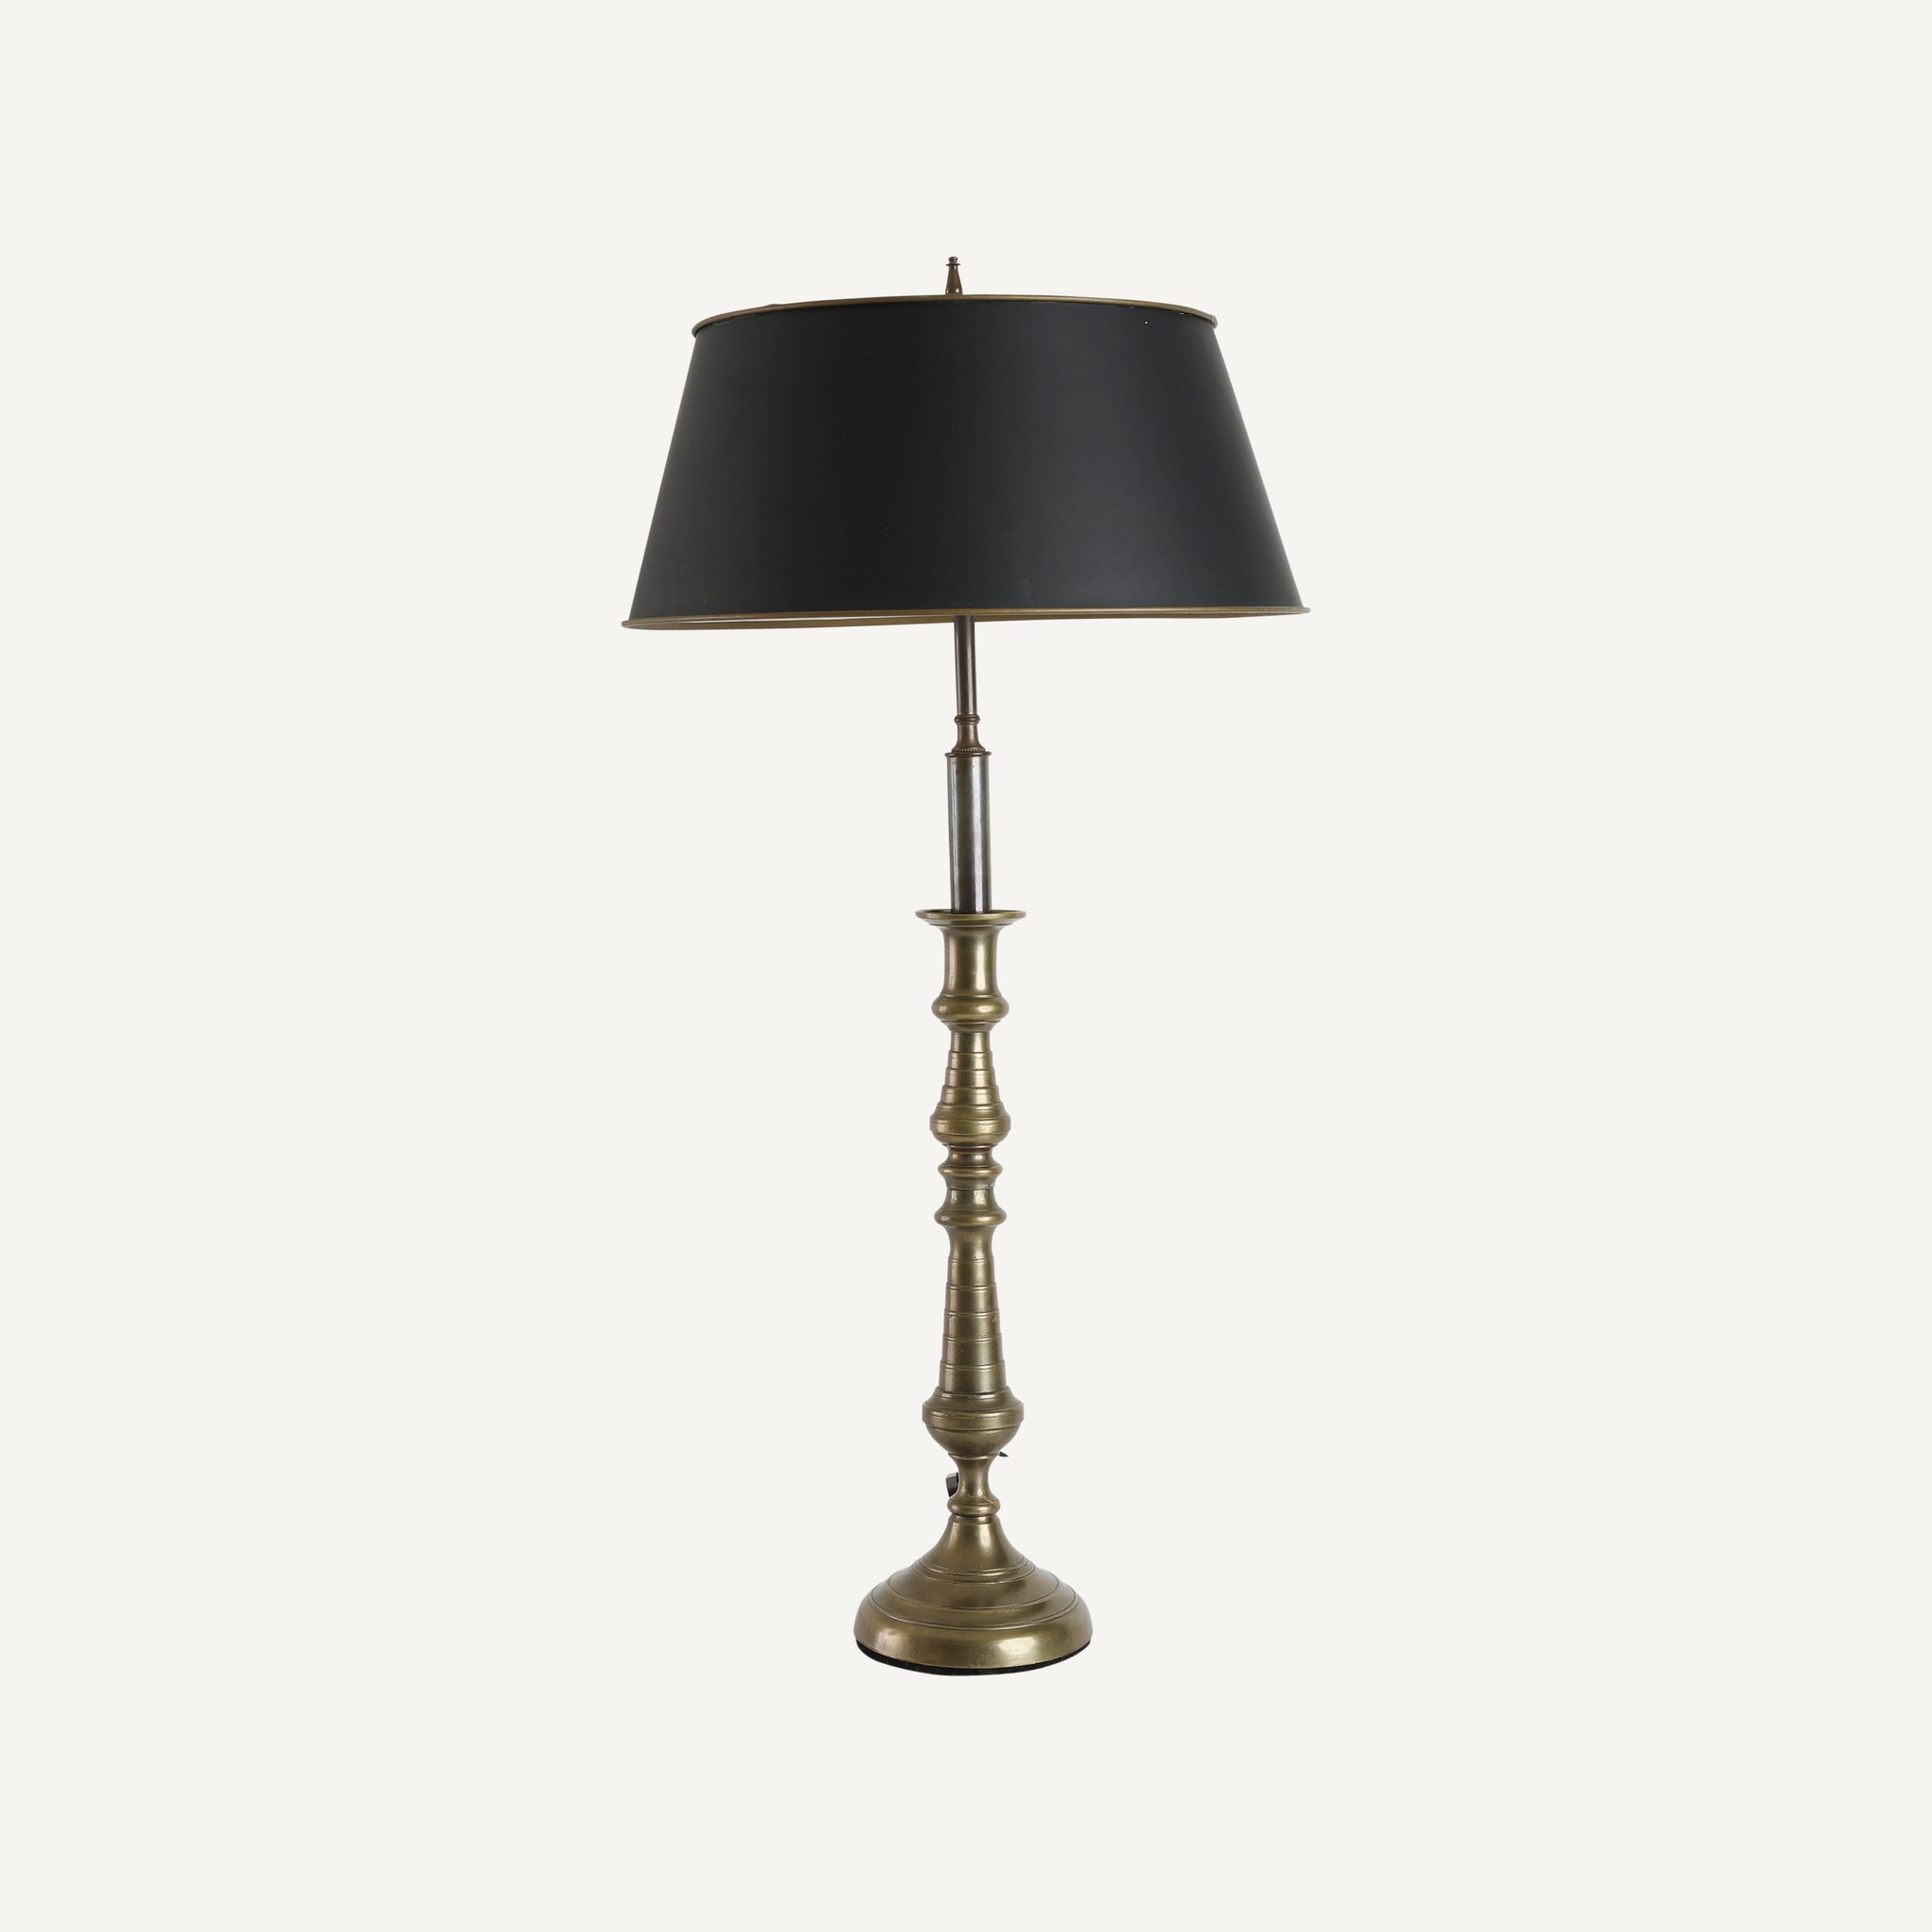 ANTIQUE BRASS LAMP WITH BLACK PAPER SHADE – PLAIN GOODS